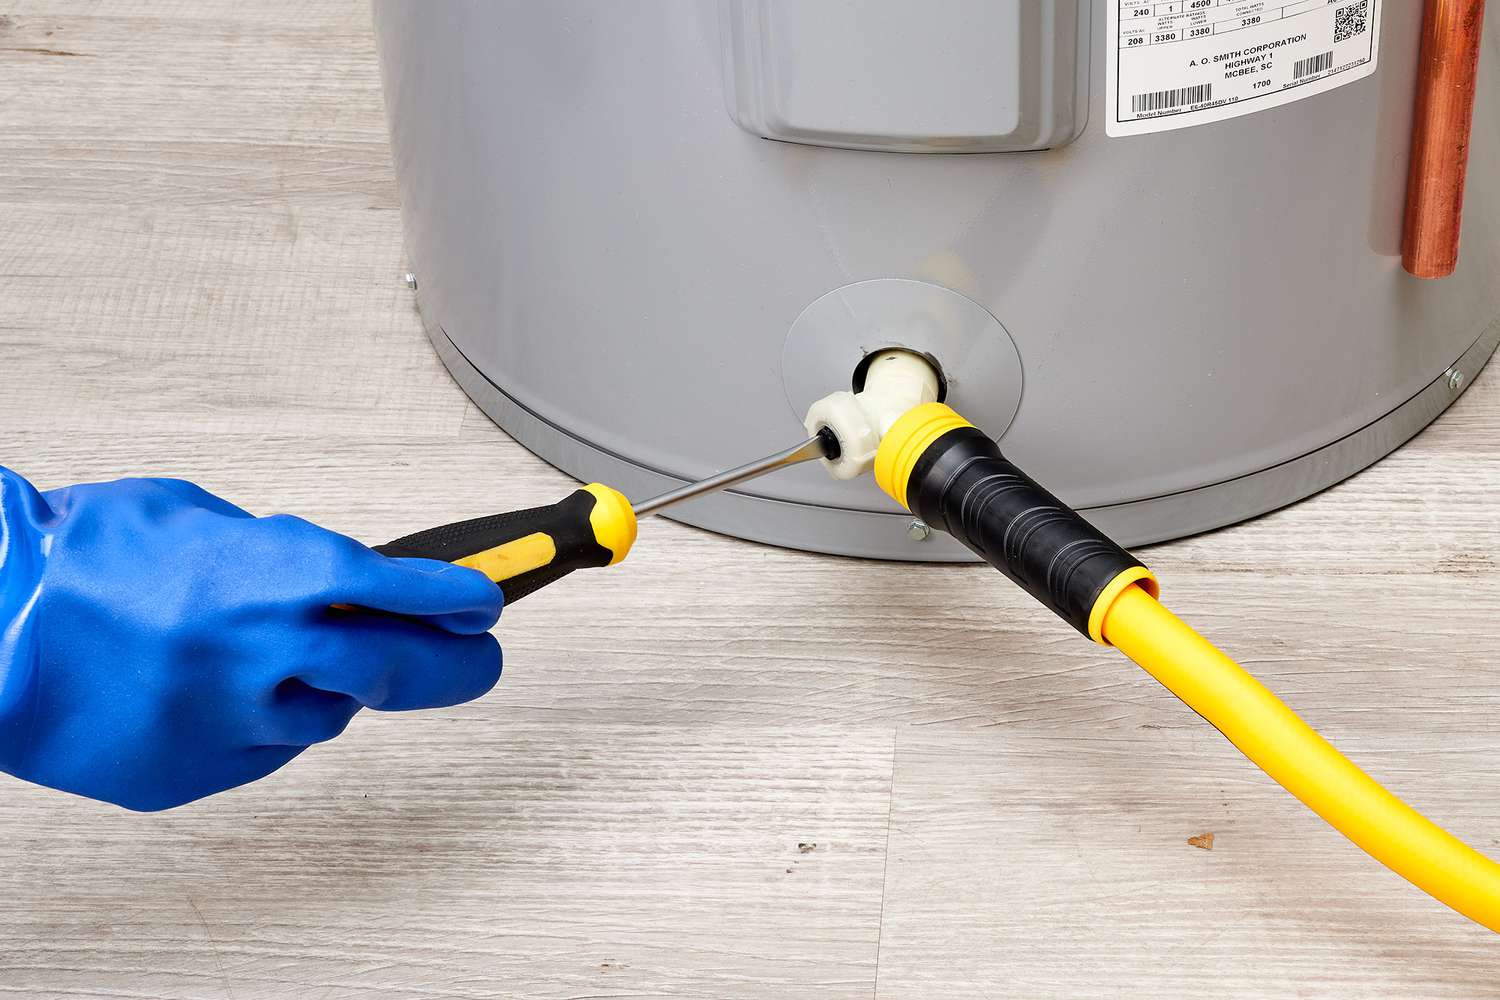 Emptying Your AO Smith Water Heater